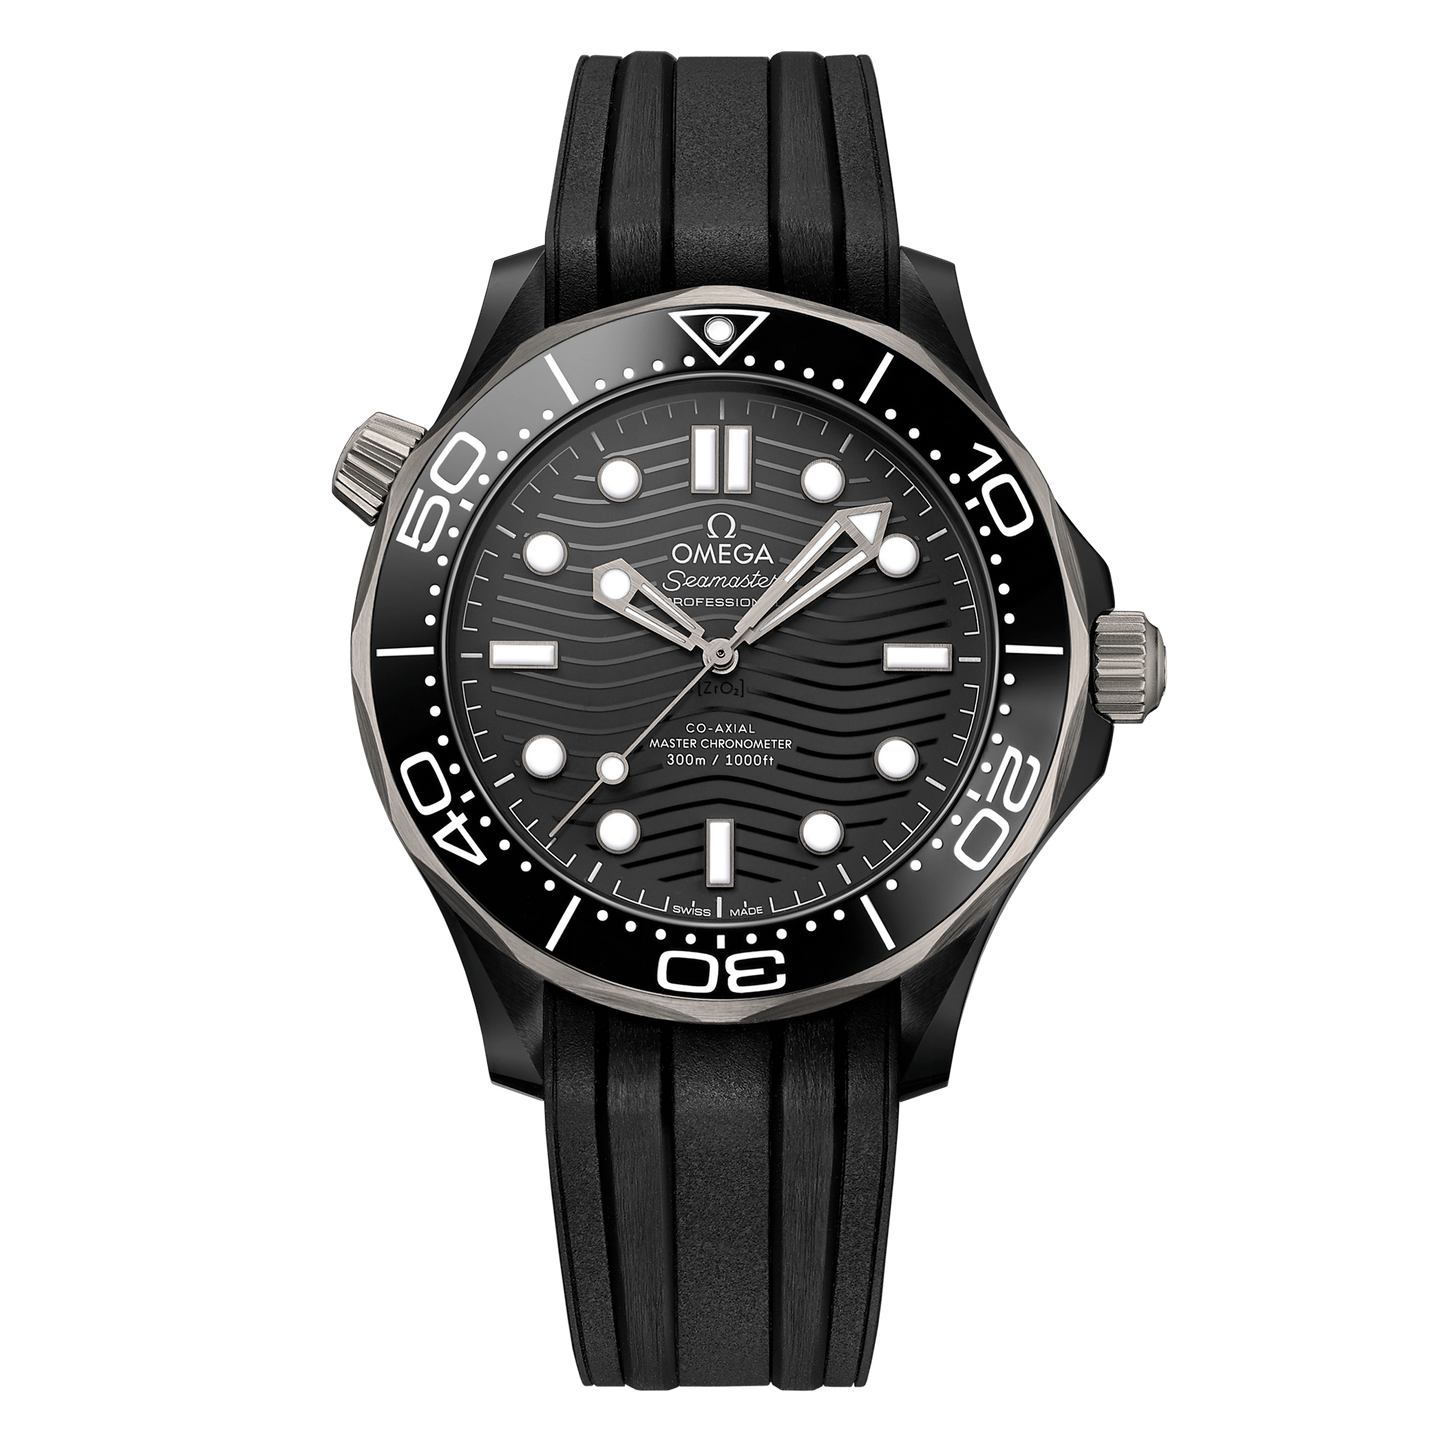 OMEGA Seamaster Diver 300m Co-Axial Master Chronometer 43.5mm, Black Rubber